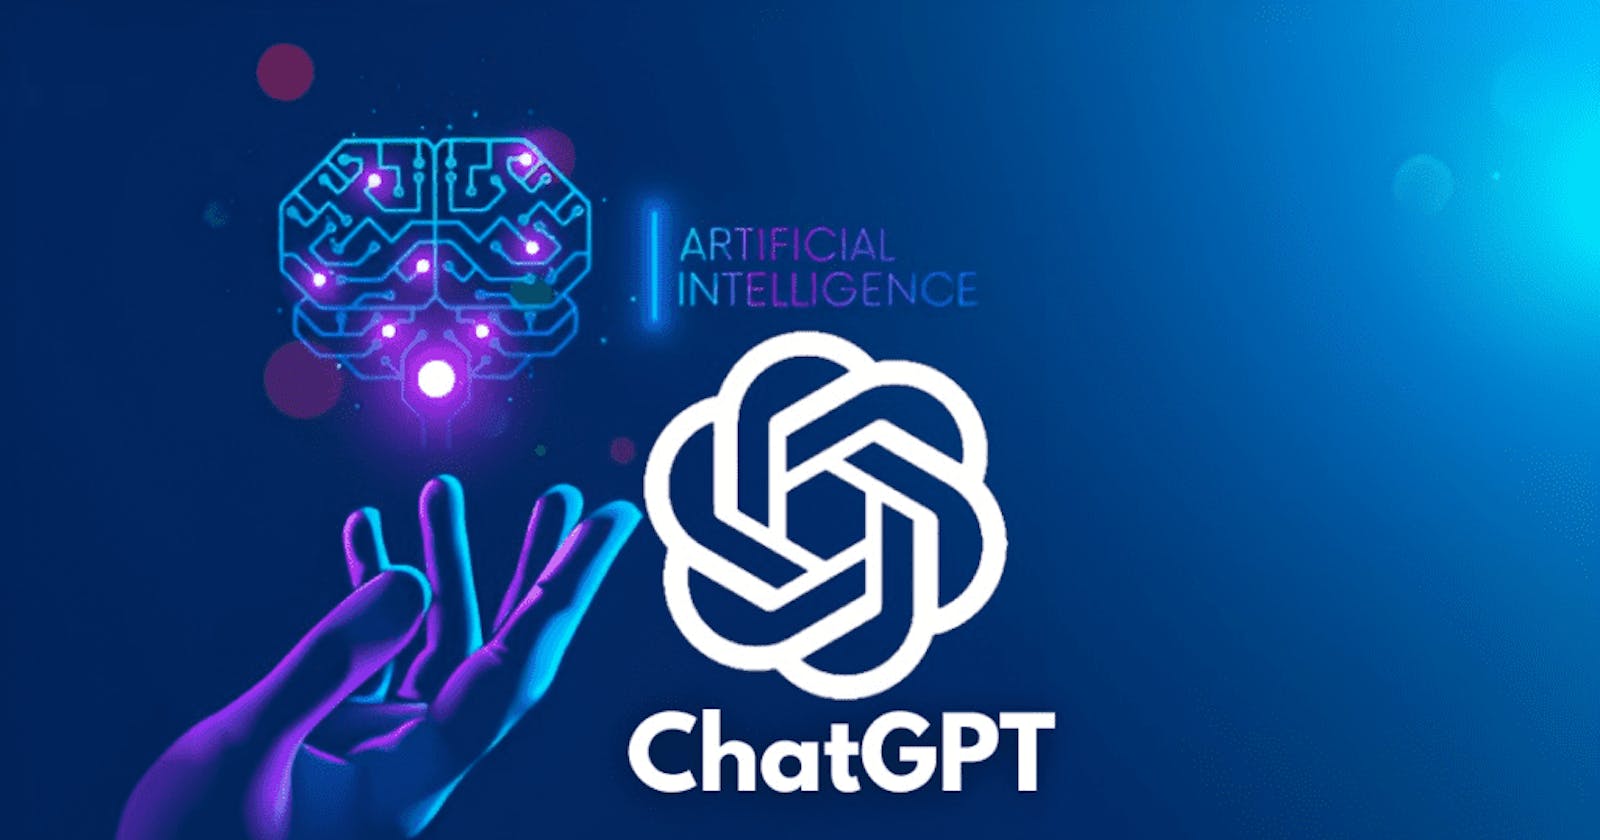 ChatGPT: The AI Chatbot That's Taking the World by Storm